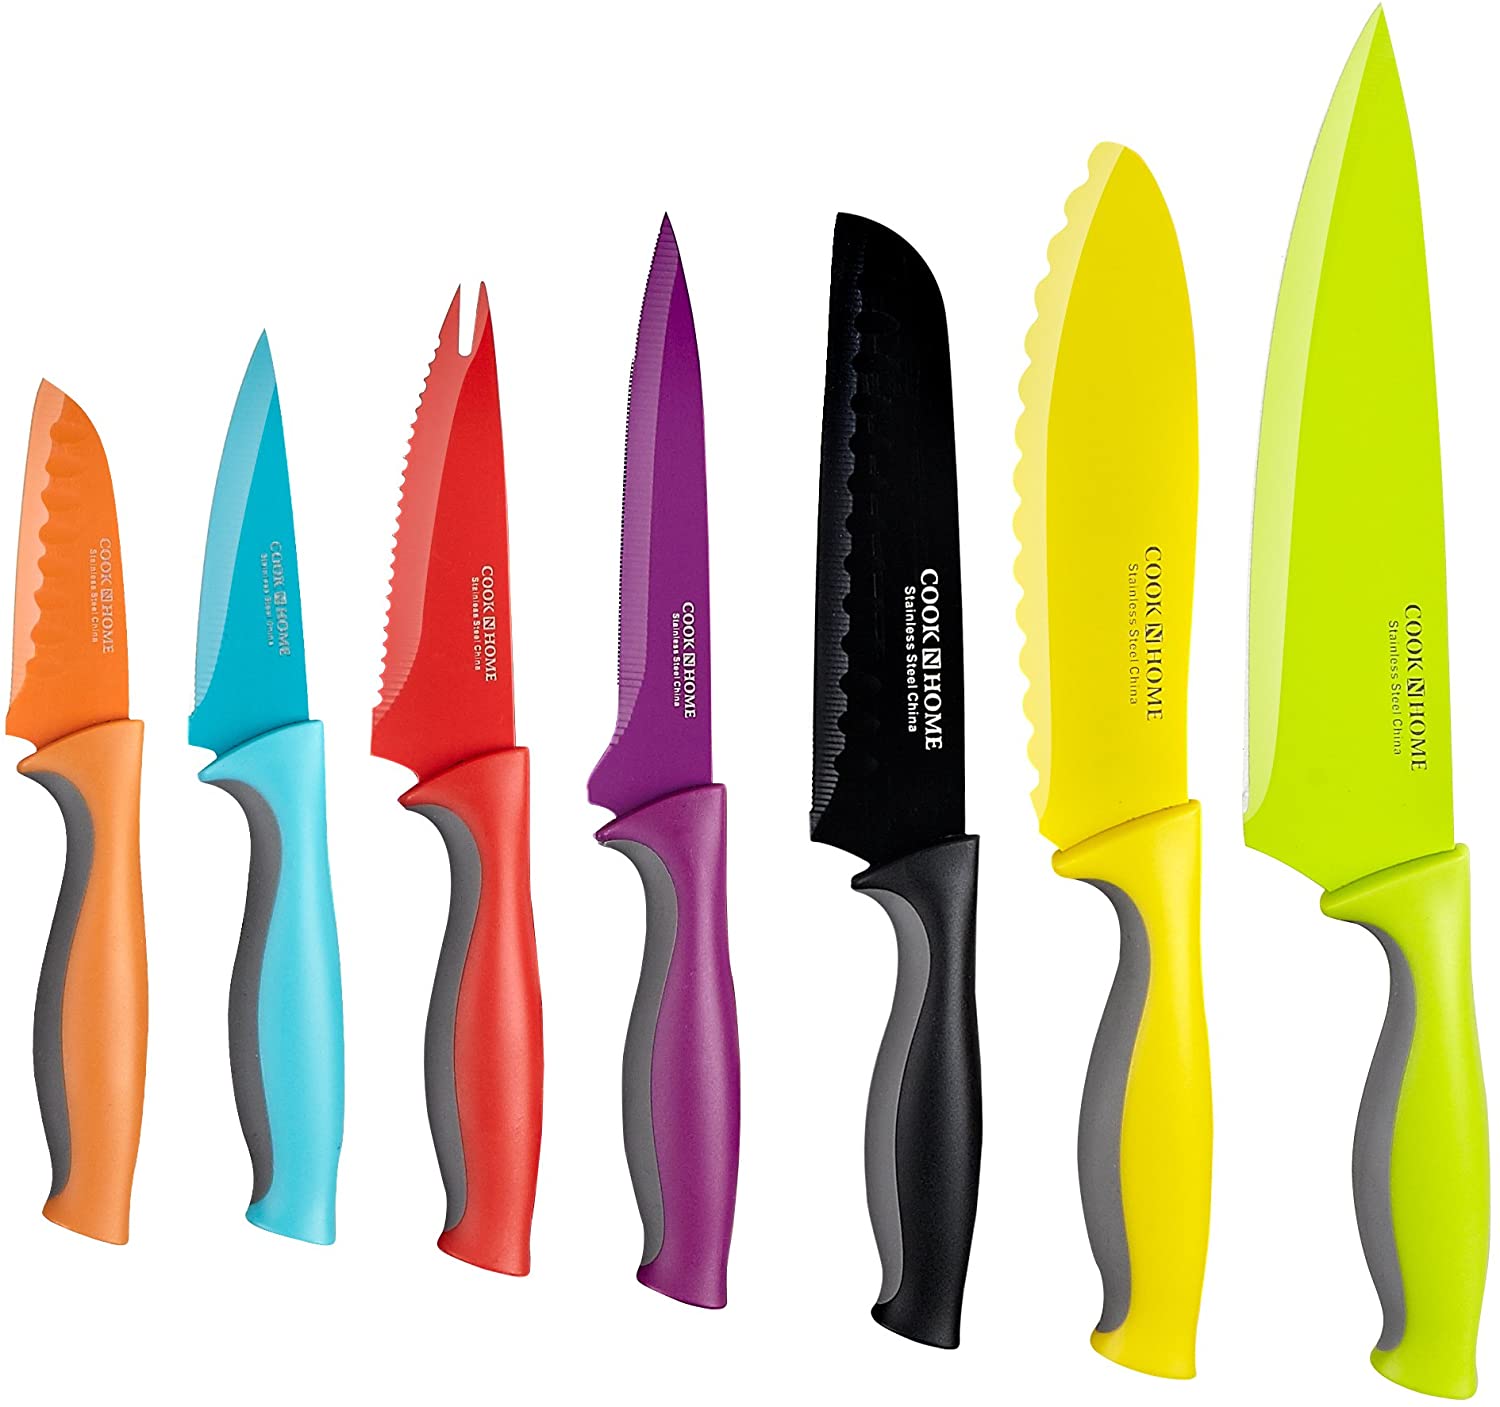 GooChef Knife Set 5-Piece Stainless Steel Coated Kitchen Knives